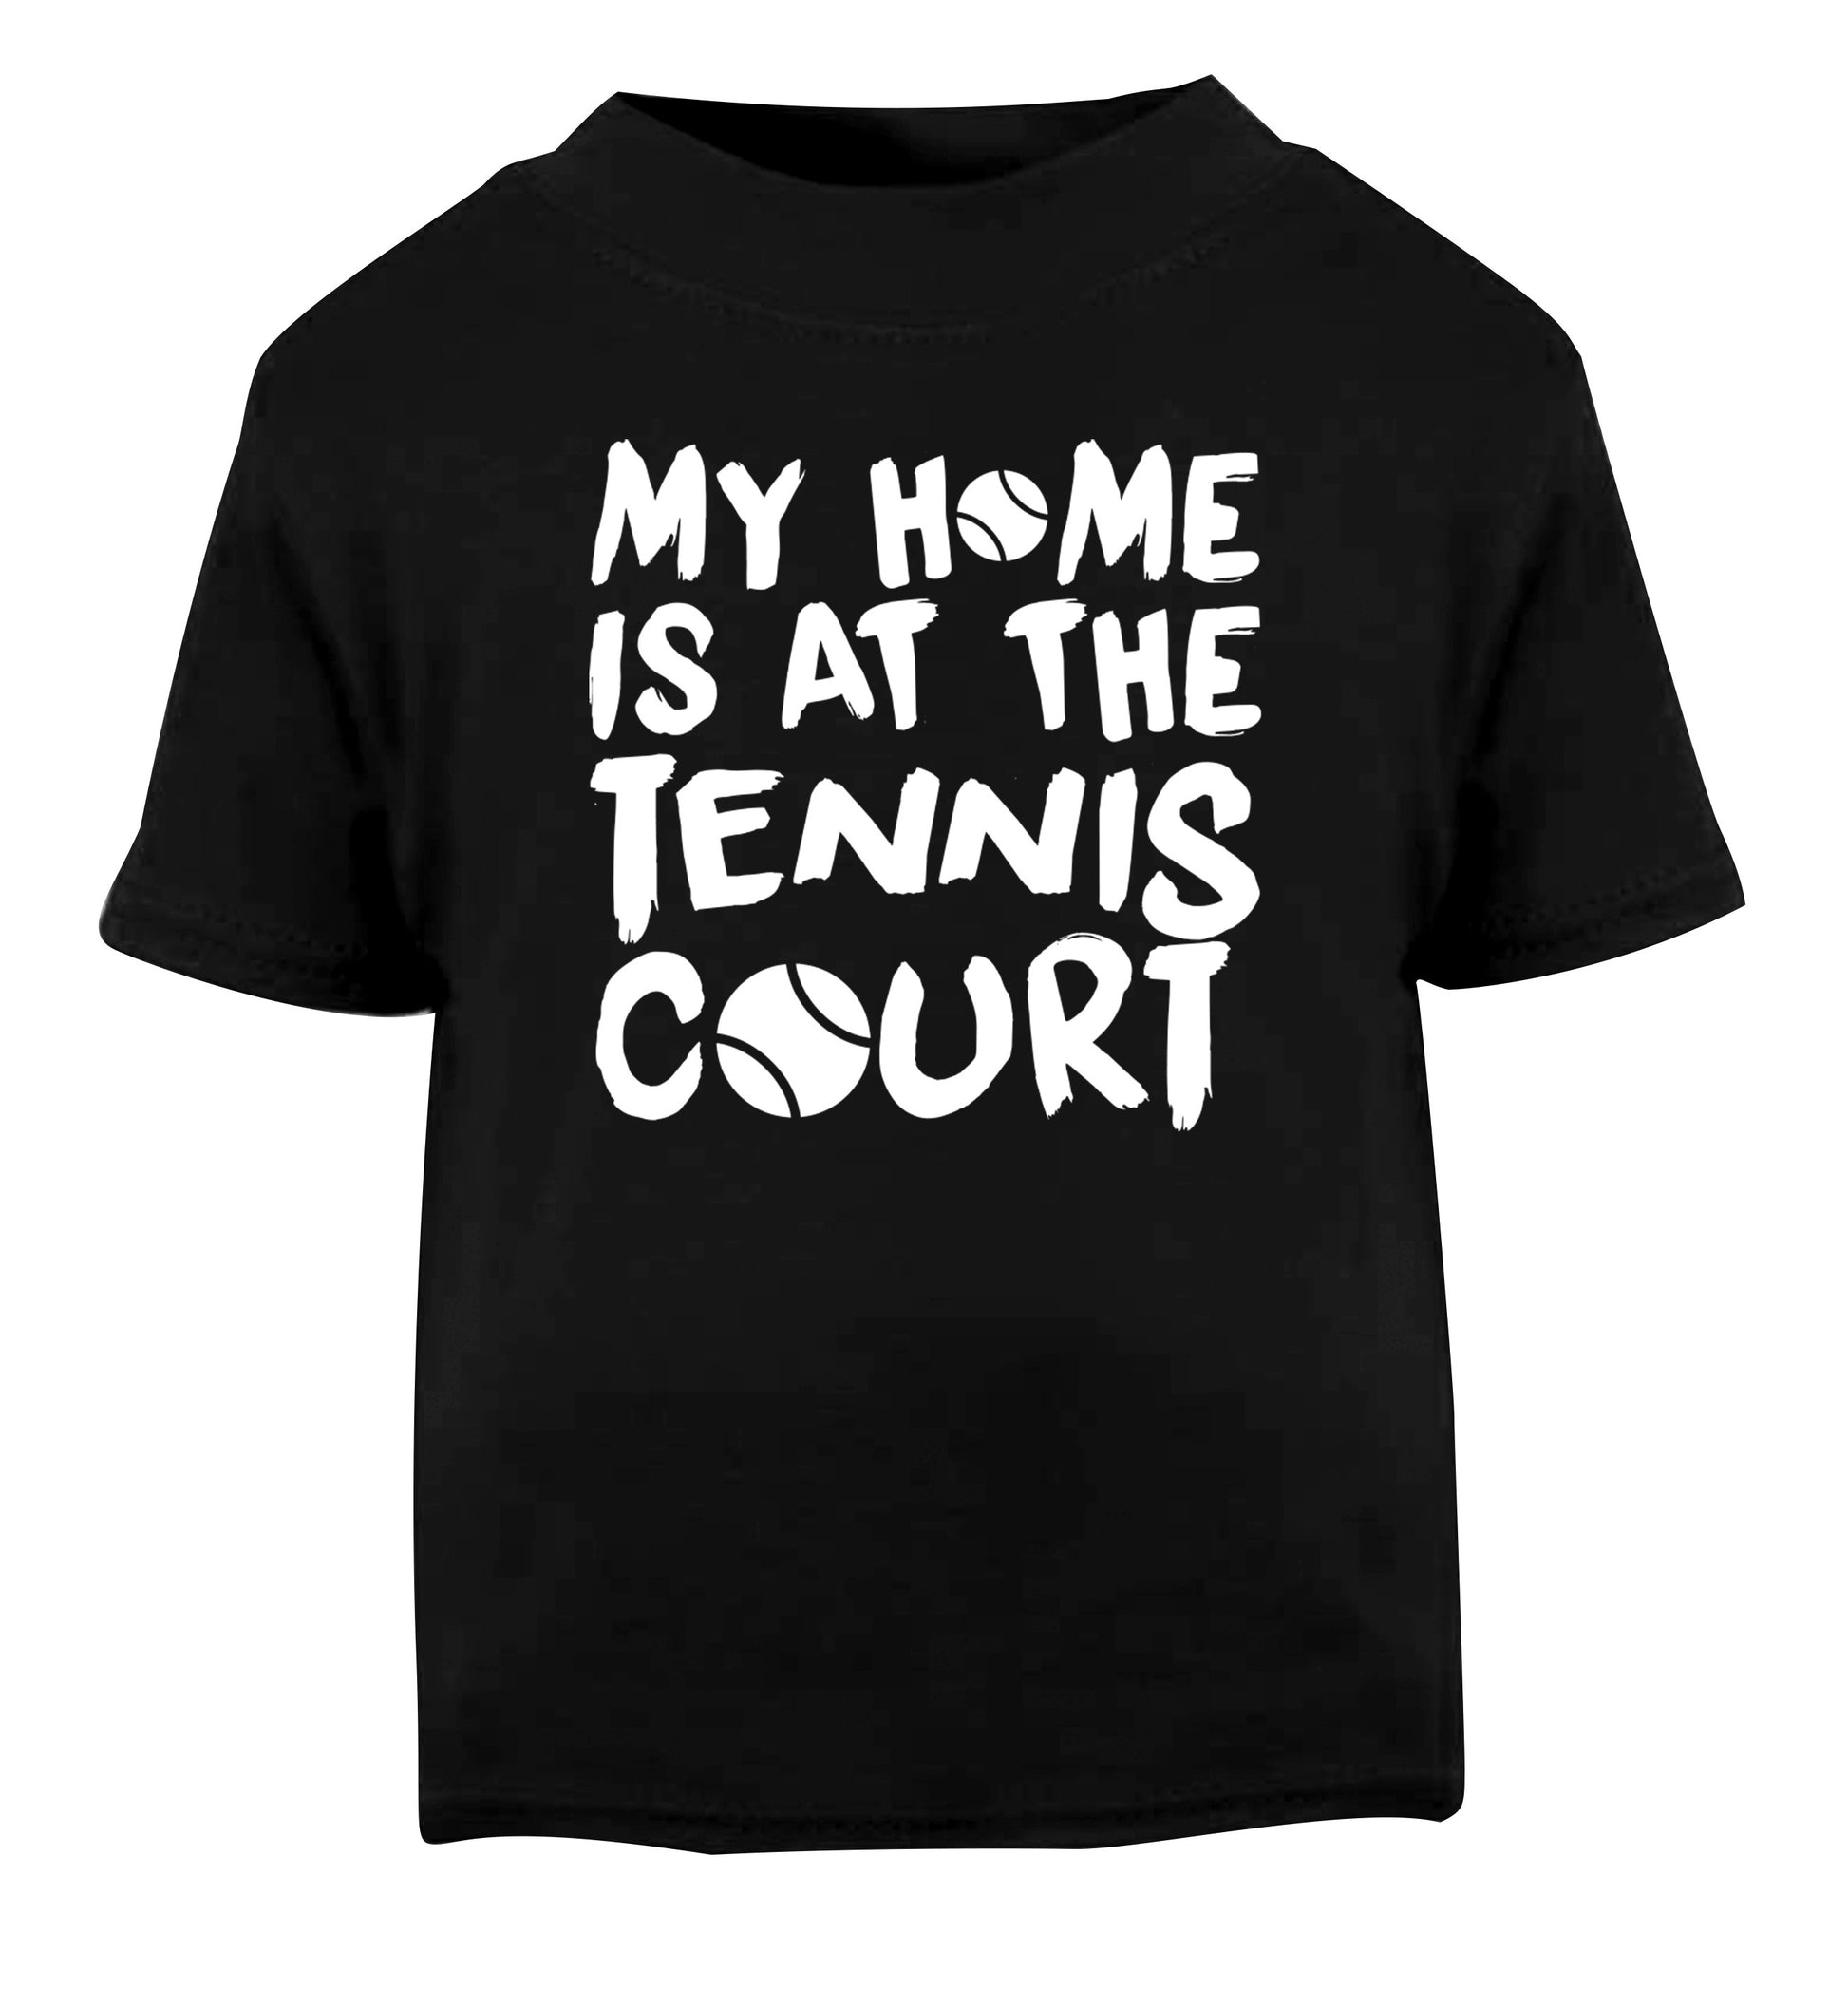 My home is at the tennis court Black Baby Toddler Tshirt 2 years